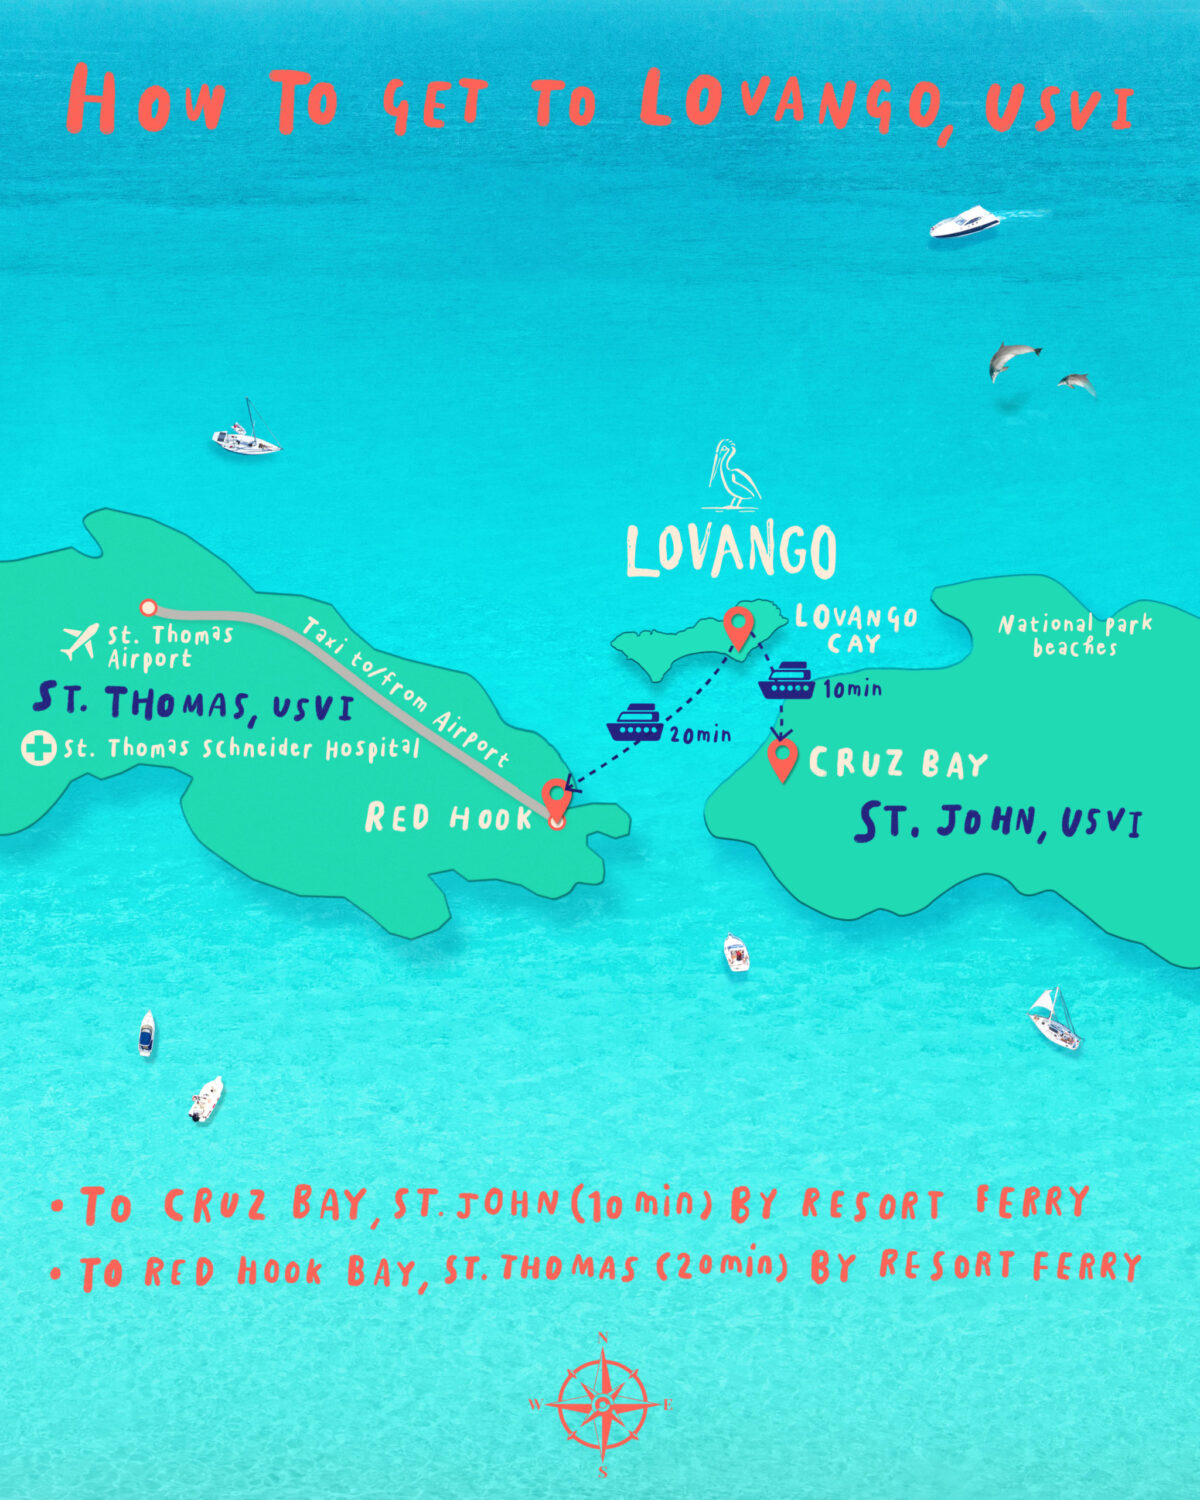 How to get to Lovango